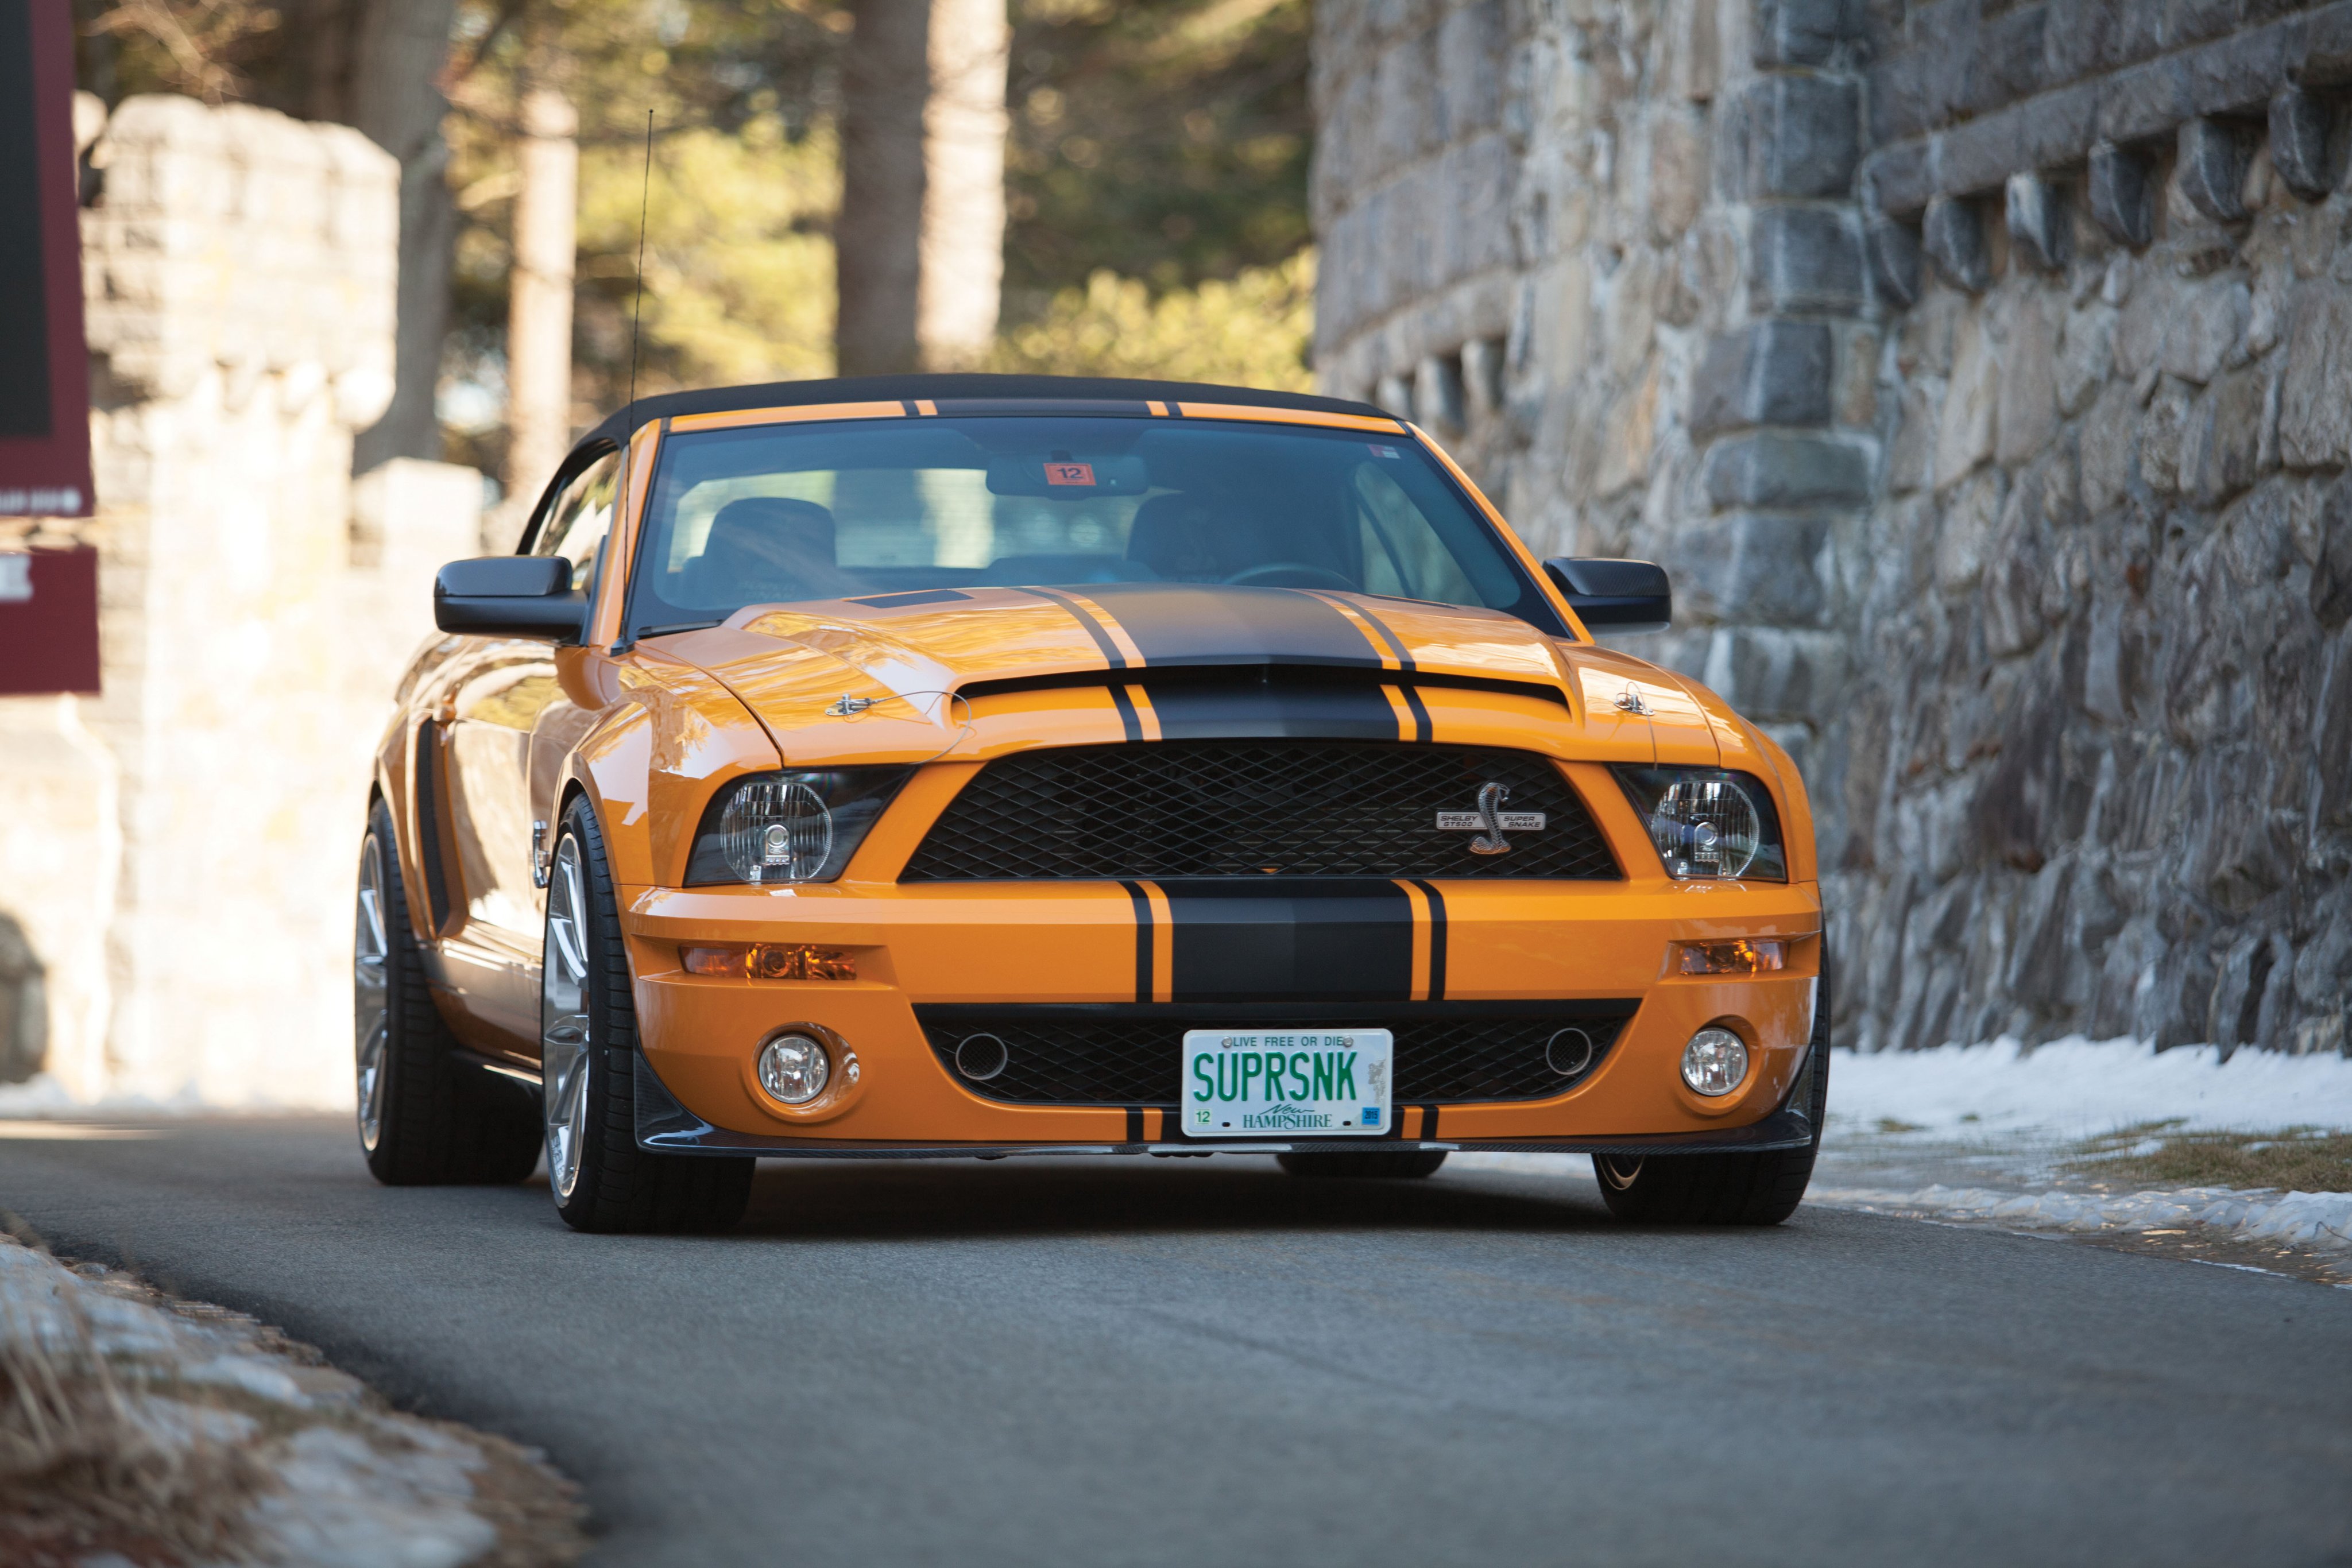 2007, Shelby, Gt500, Super, Snake, Convertible, Prototype, Ford, Mustang, Muscle, G t Wallpaper